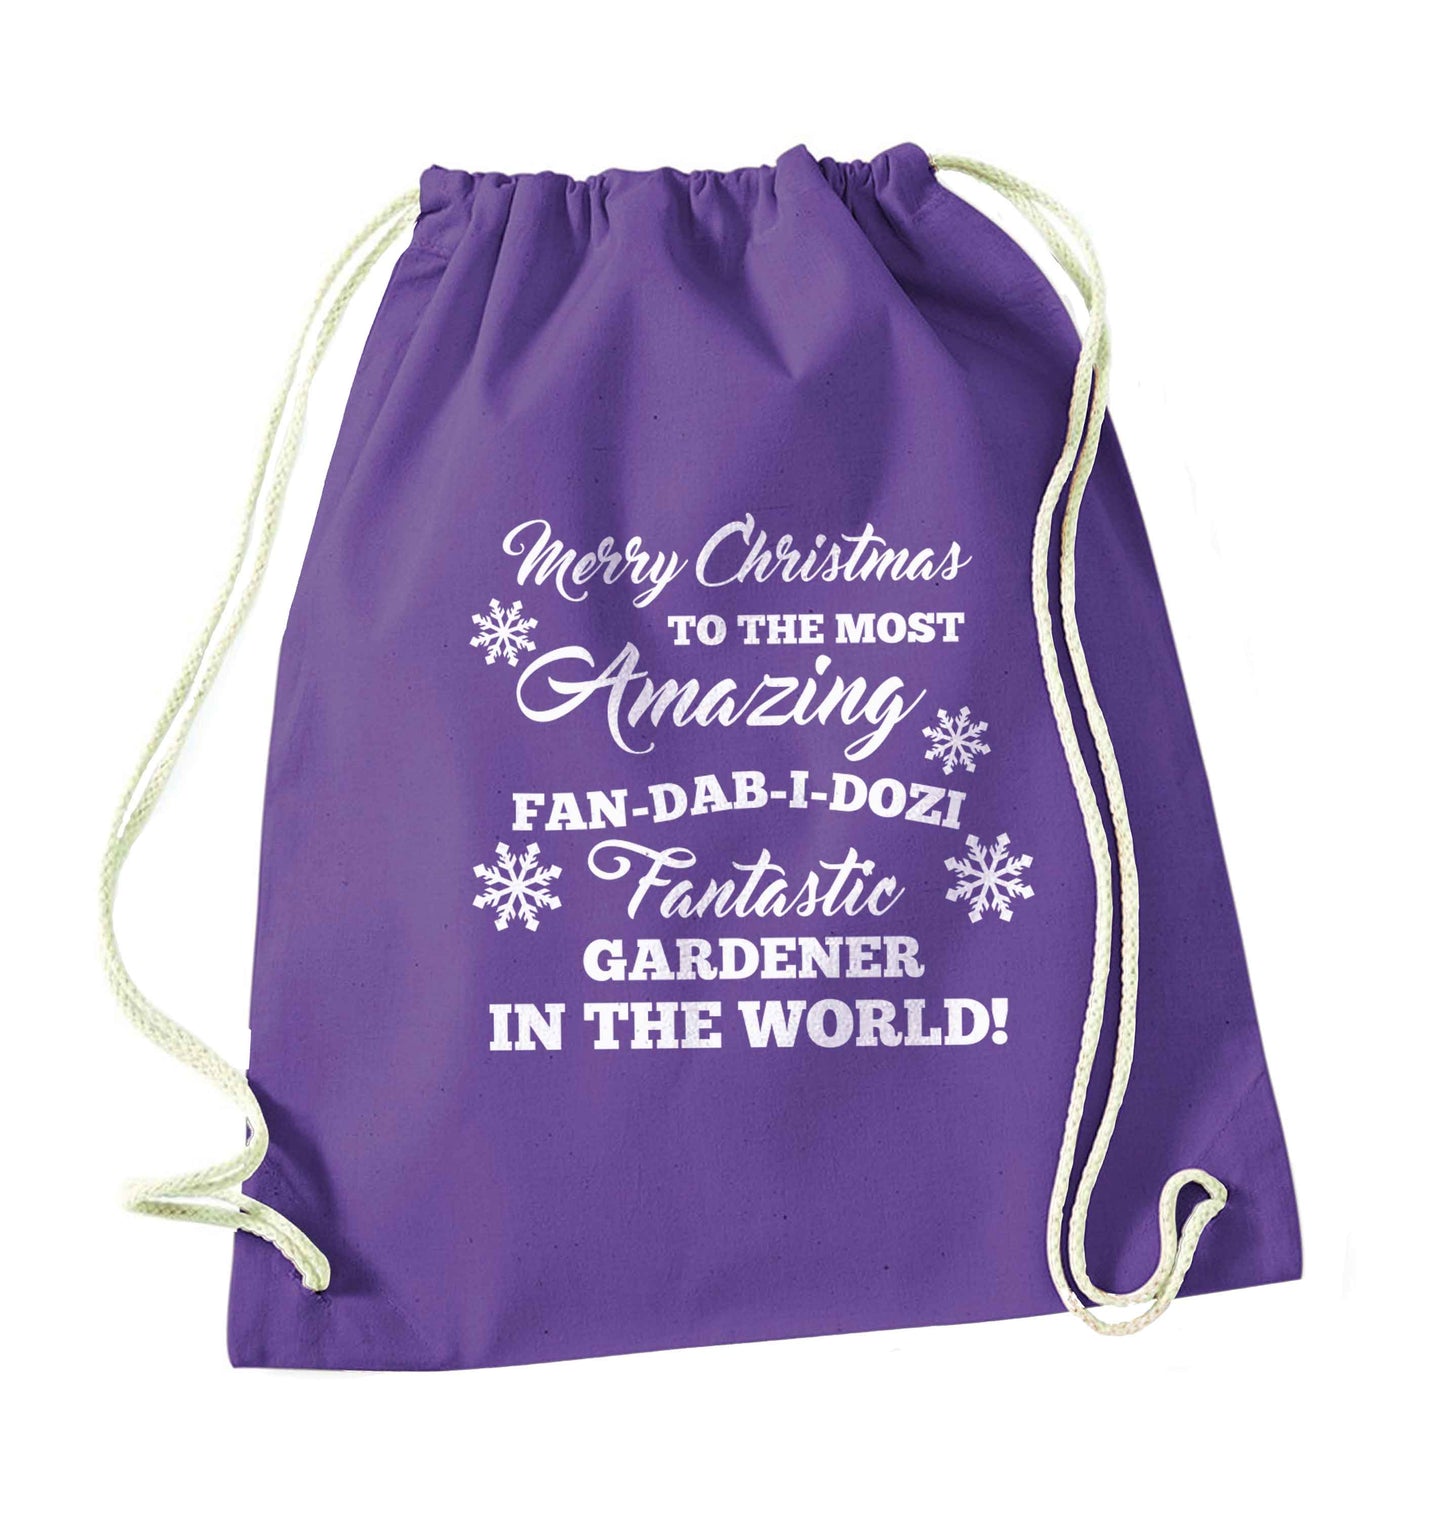 Merry Christmas to the most amazing gardener in the world! purple drawstring bag